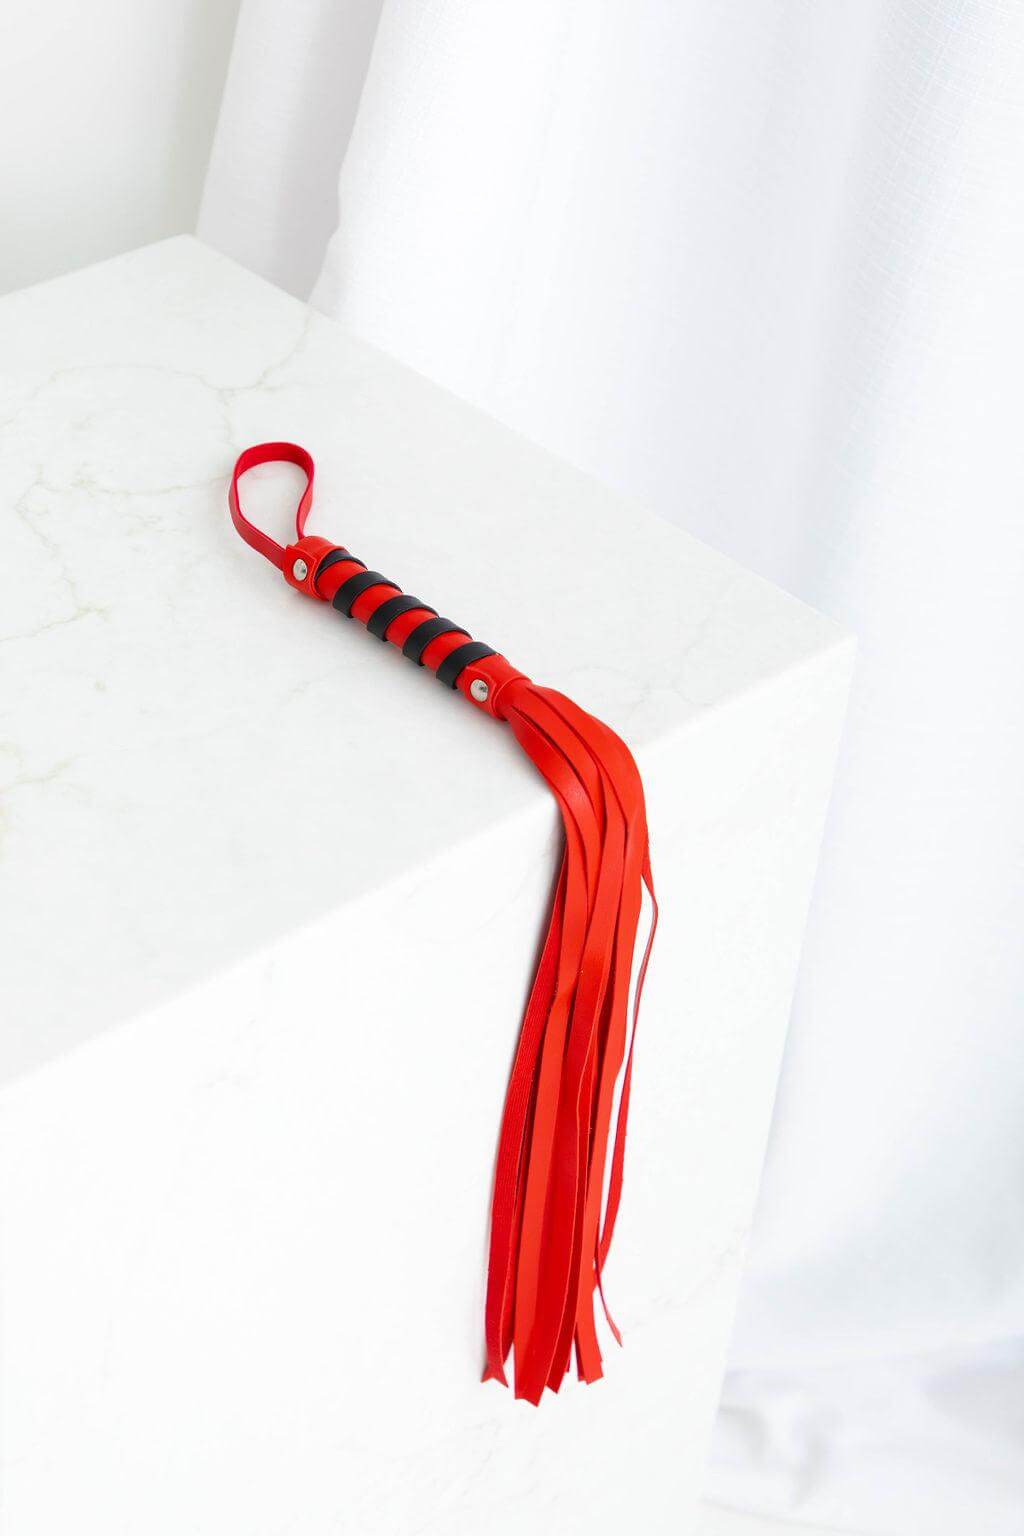 Candy Whip Red - $26.00 - Whip - Naked Curve